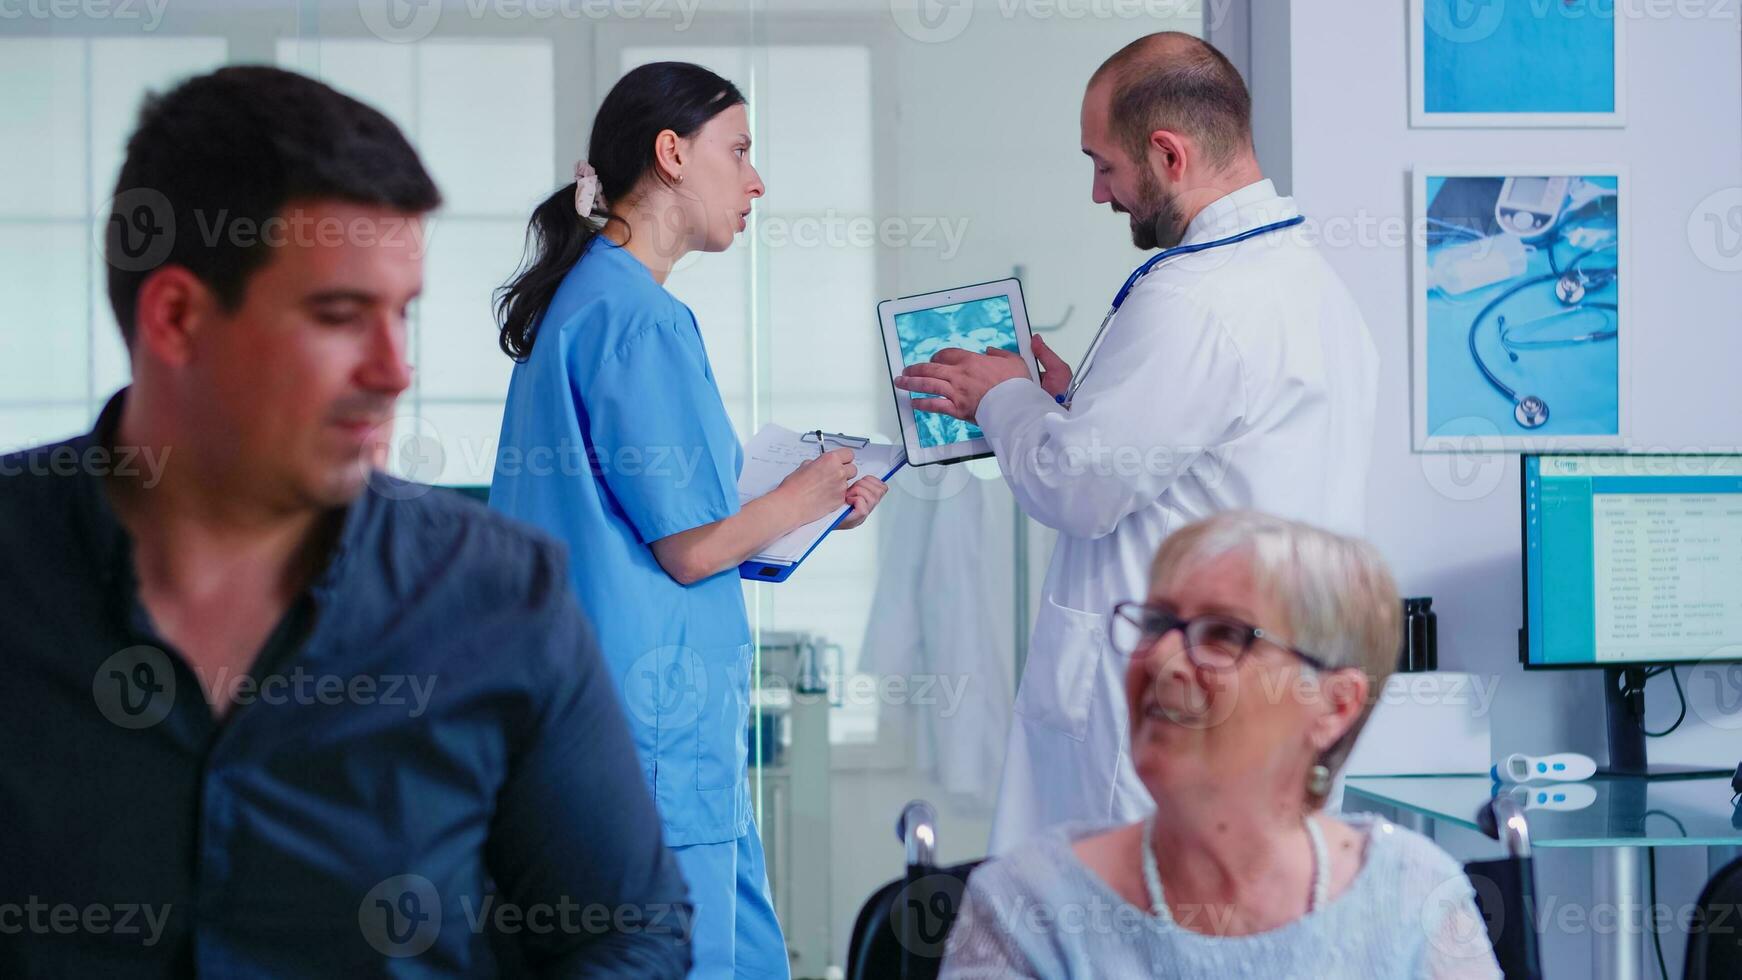 Doctor pointing at tablet pc with patient xray while discussing with nurse in hospital hallway. Doctor wearing white coat and stethoscope. Health care system medical diagnosis disease teamwork photo